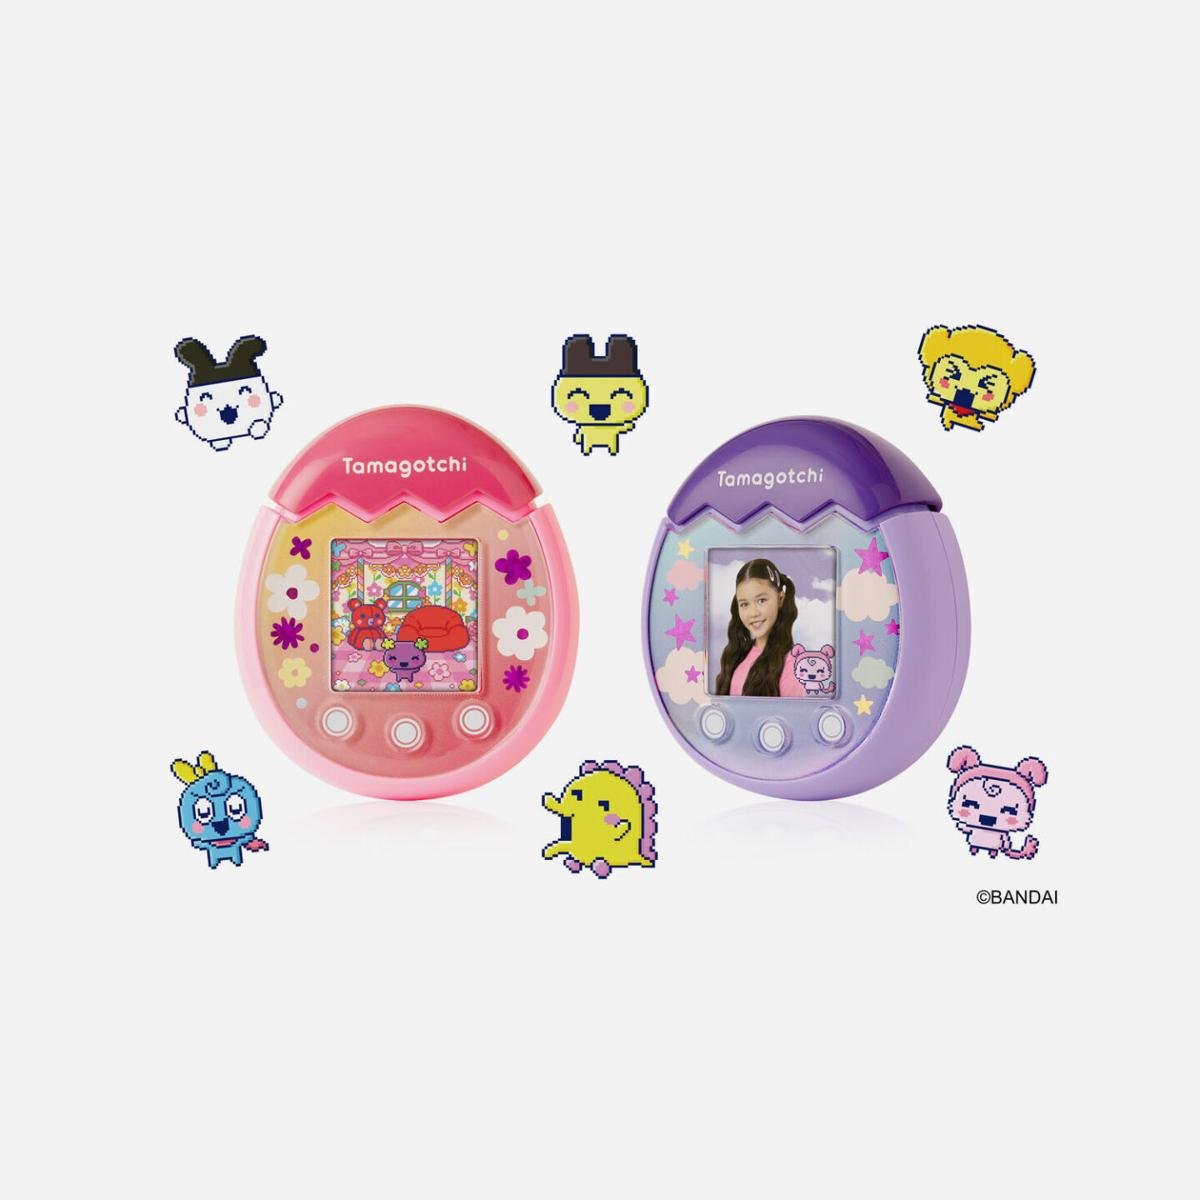 spontan Alle Udgående The '90s era Tamagotchi is back — this time with a camera